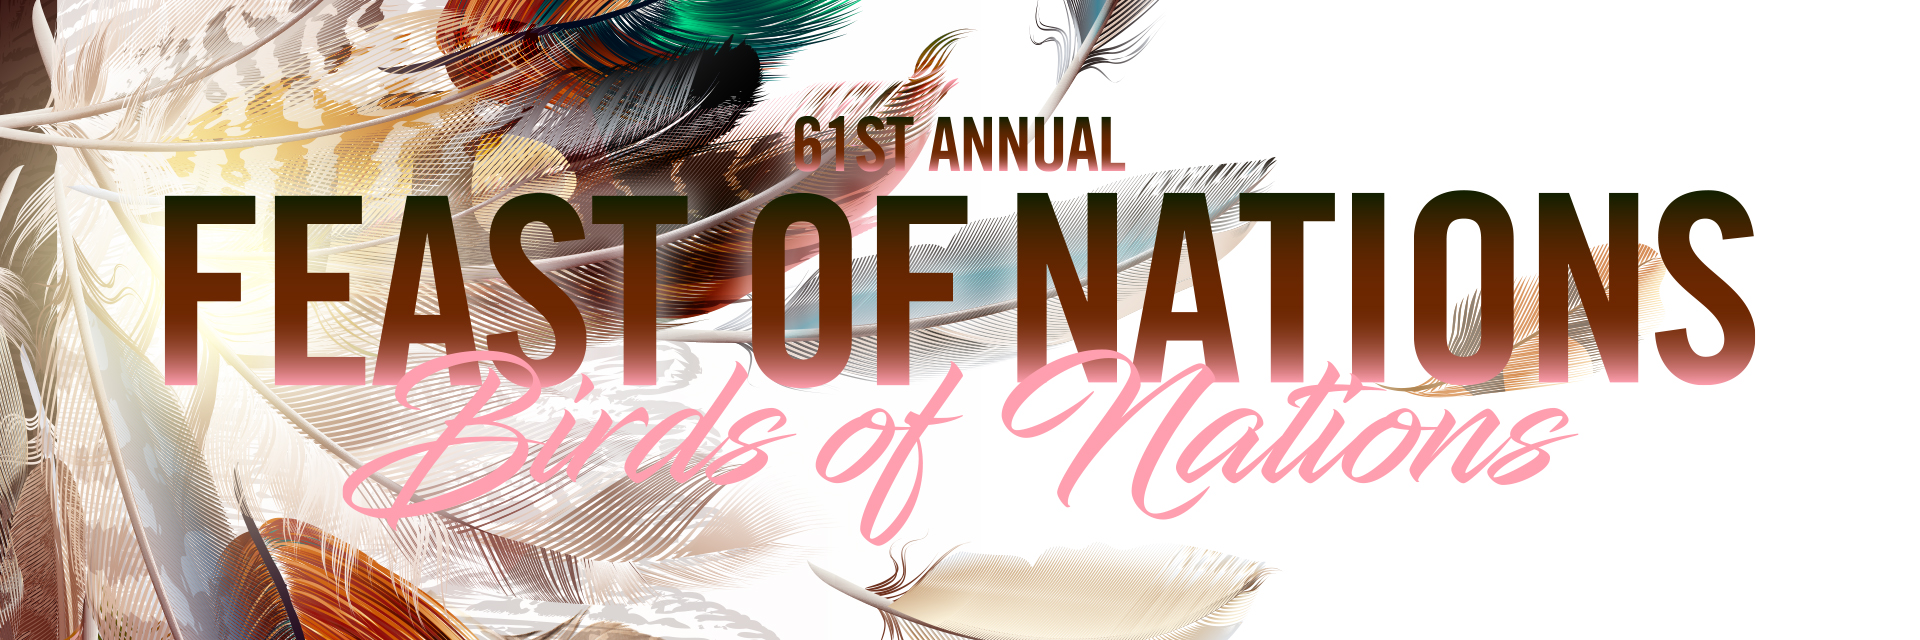 feast of nations